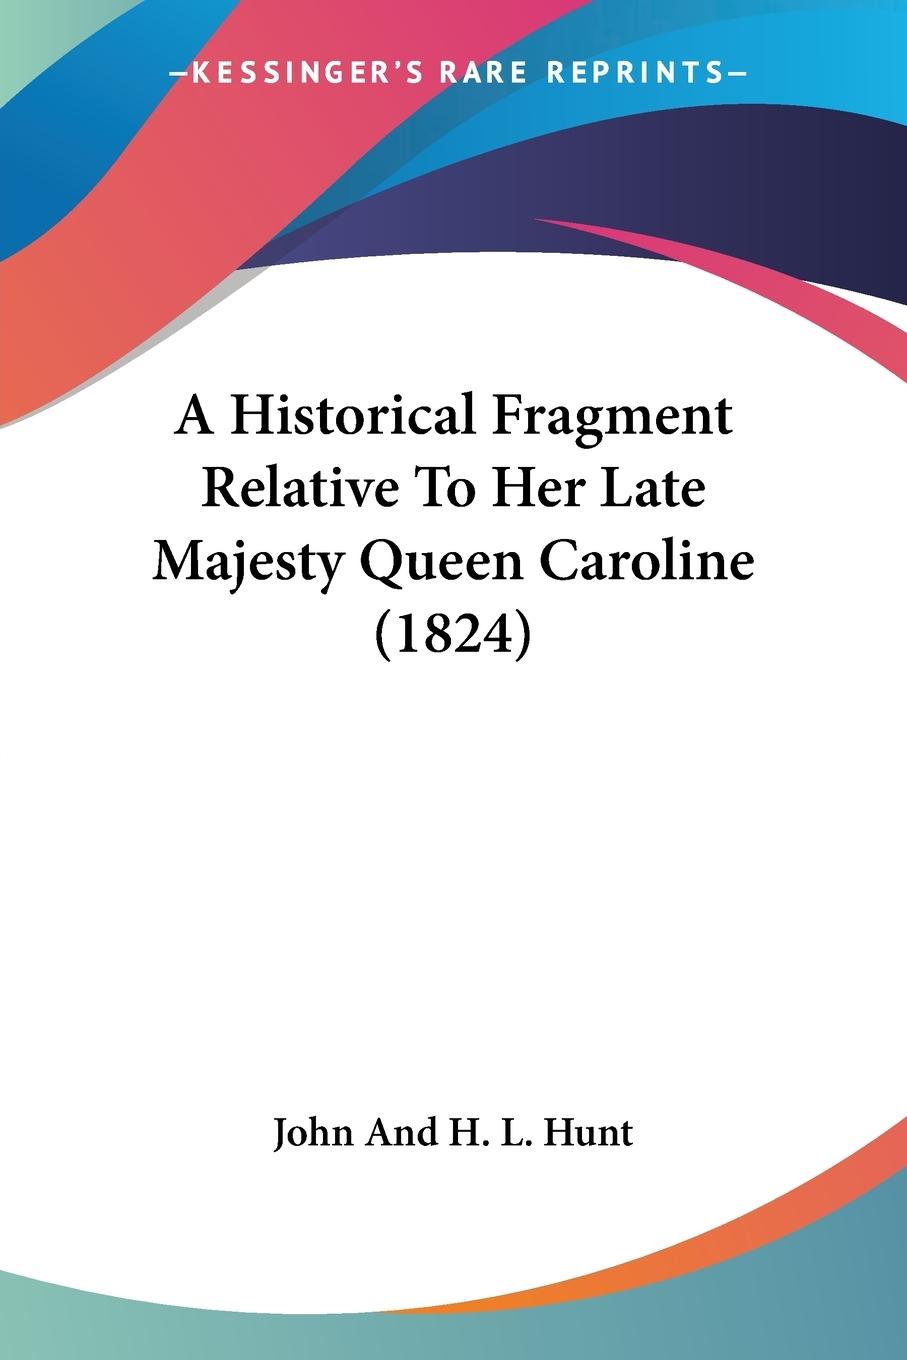 A Historical Fragment Relative To Her Late Majesty Queen Caroline (1824) - John And H. L. Hunt